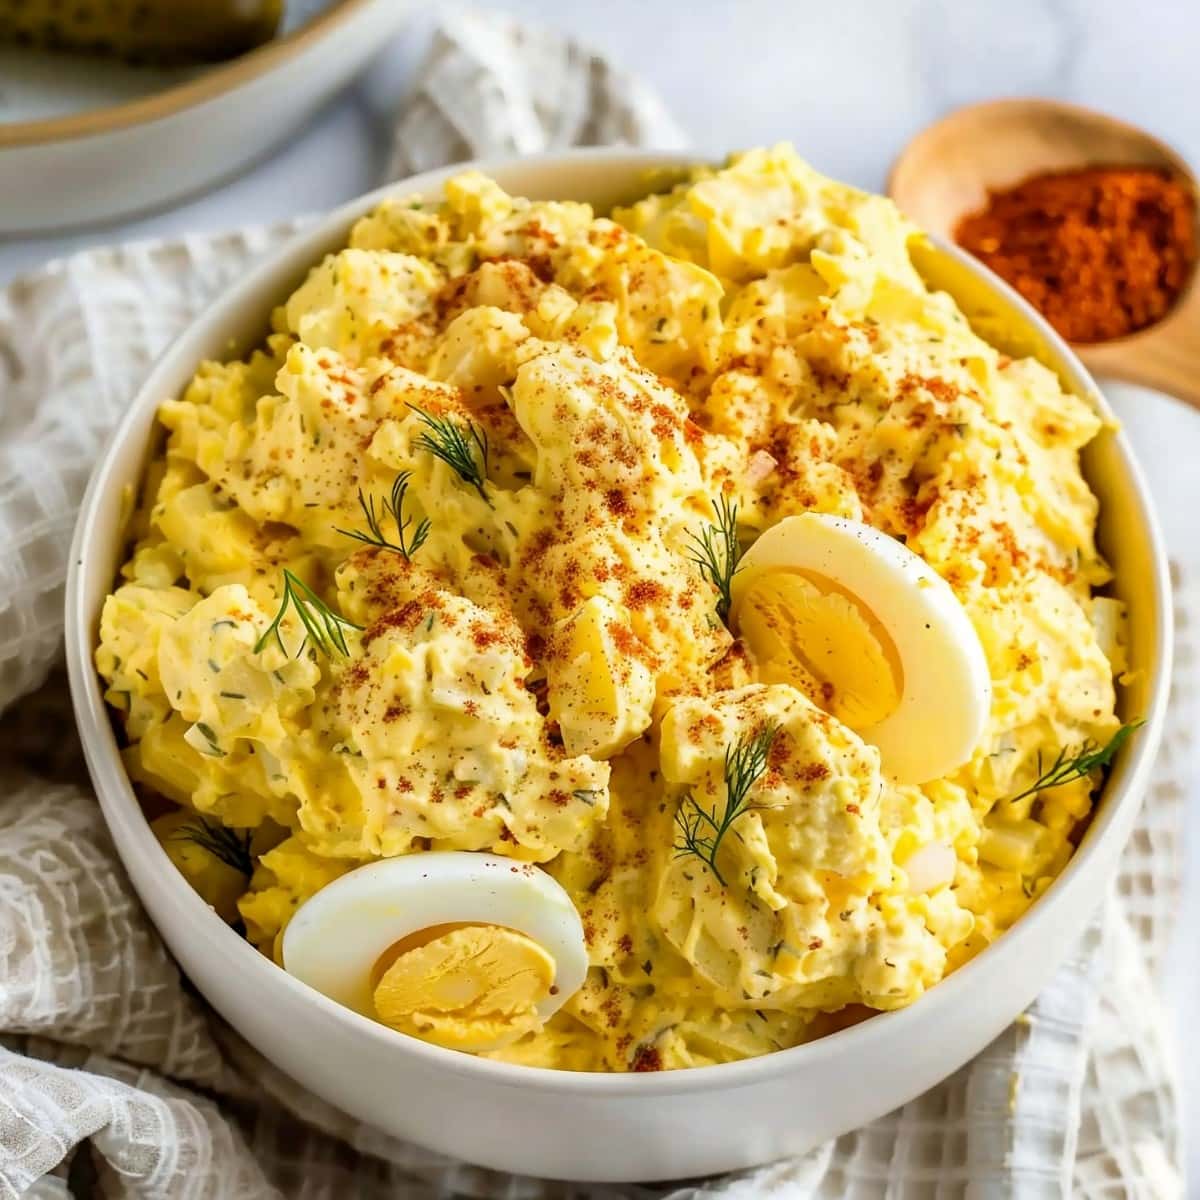 Delicious deviled egg potato salad, combining two classic dishes into one irresistible side